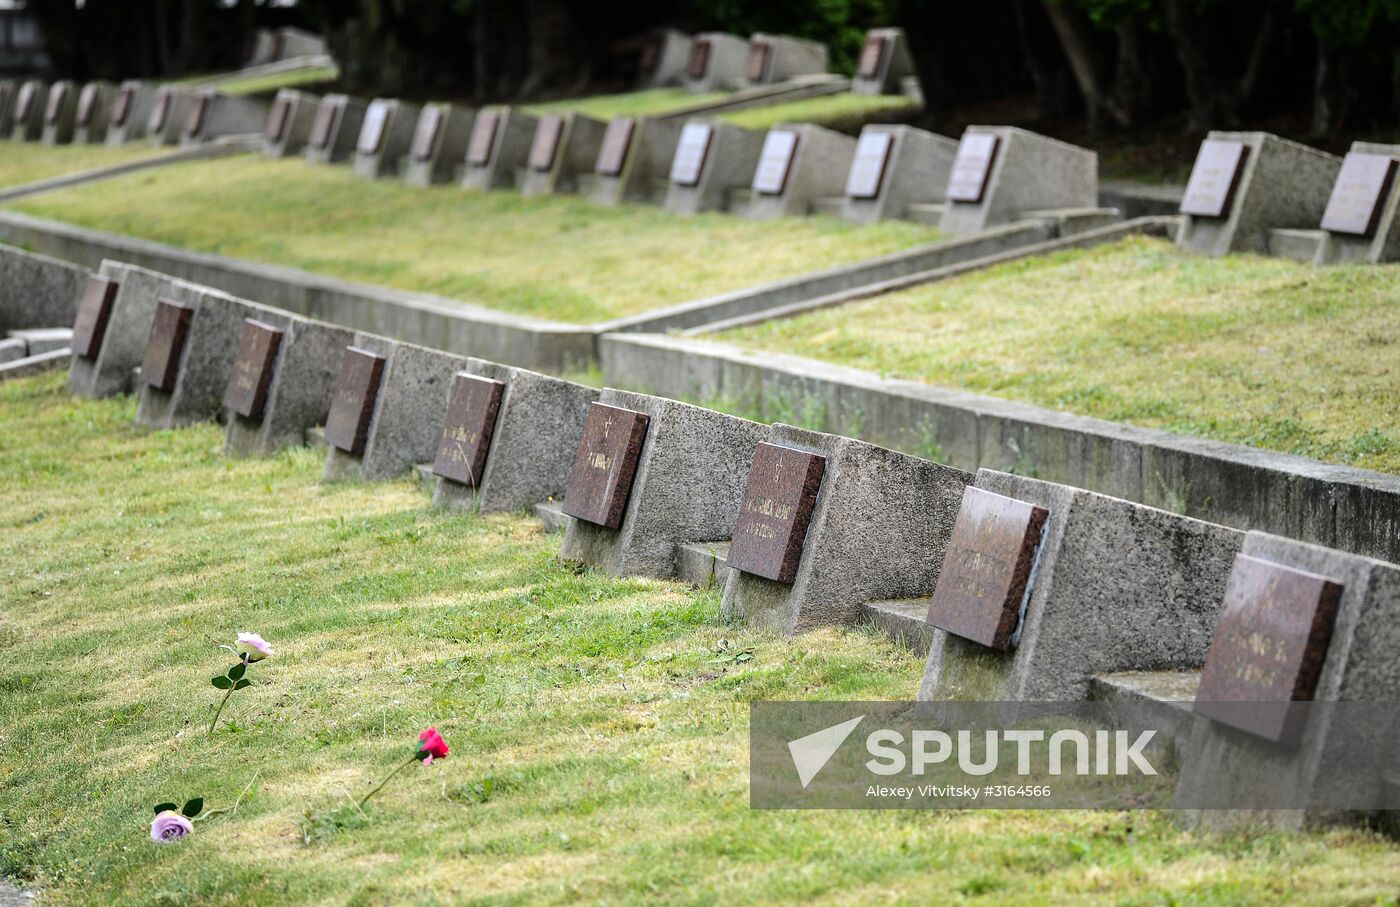 Soviet Military Cemetery in Warsaw